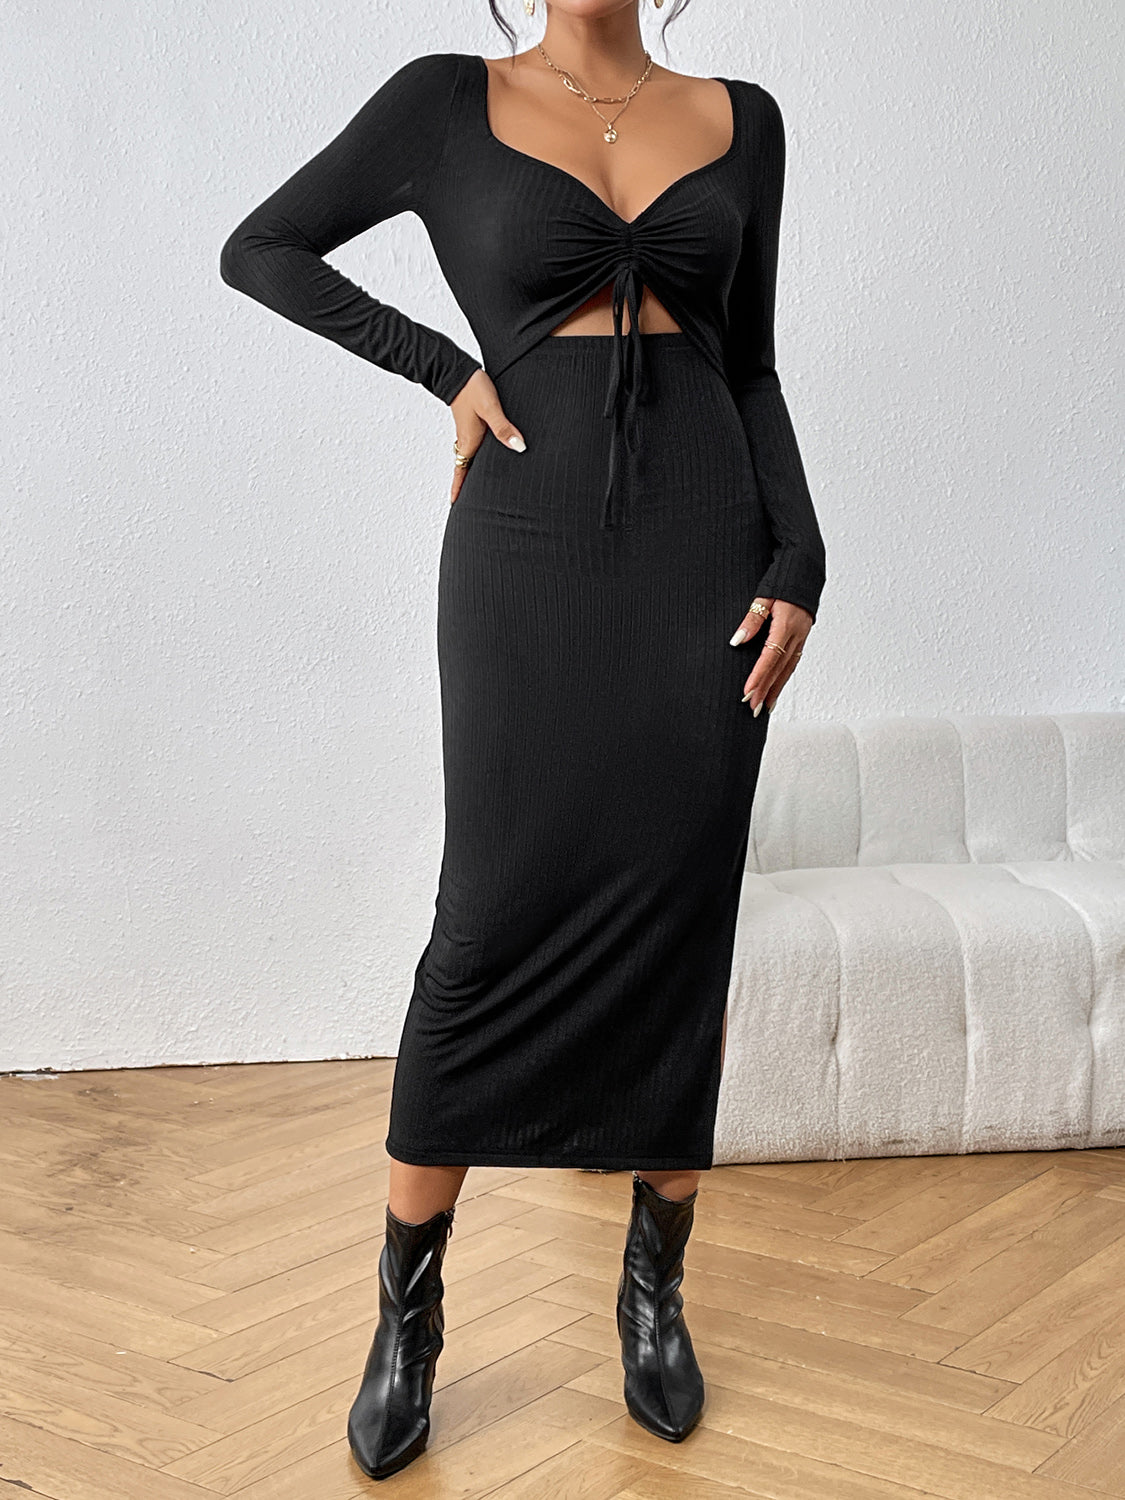 black dress with cutout drawstring halter design front with side slit, long sleeves and silky polyester fabric